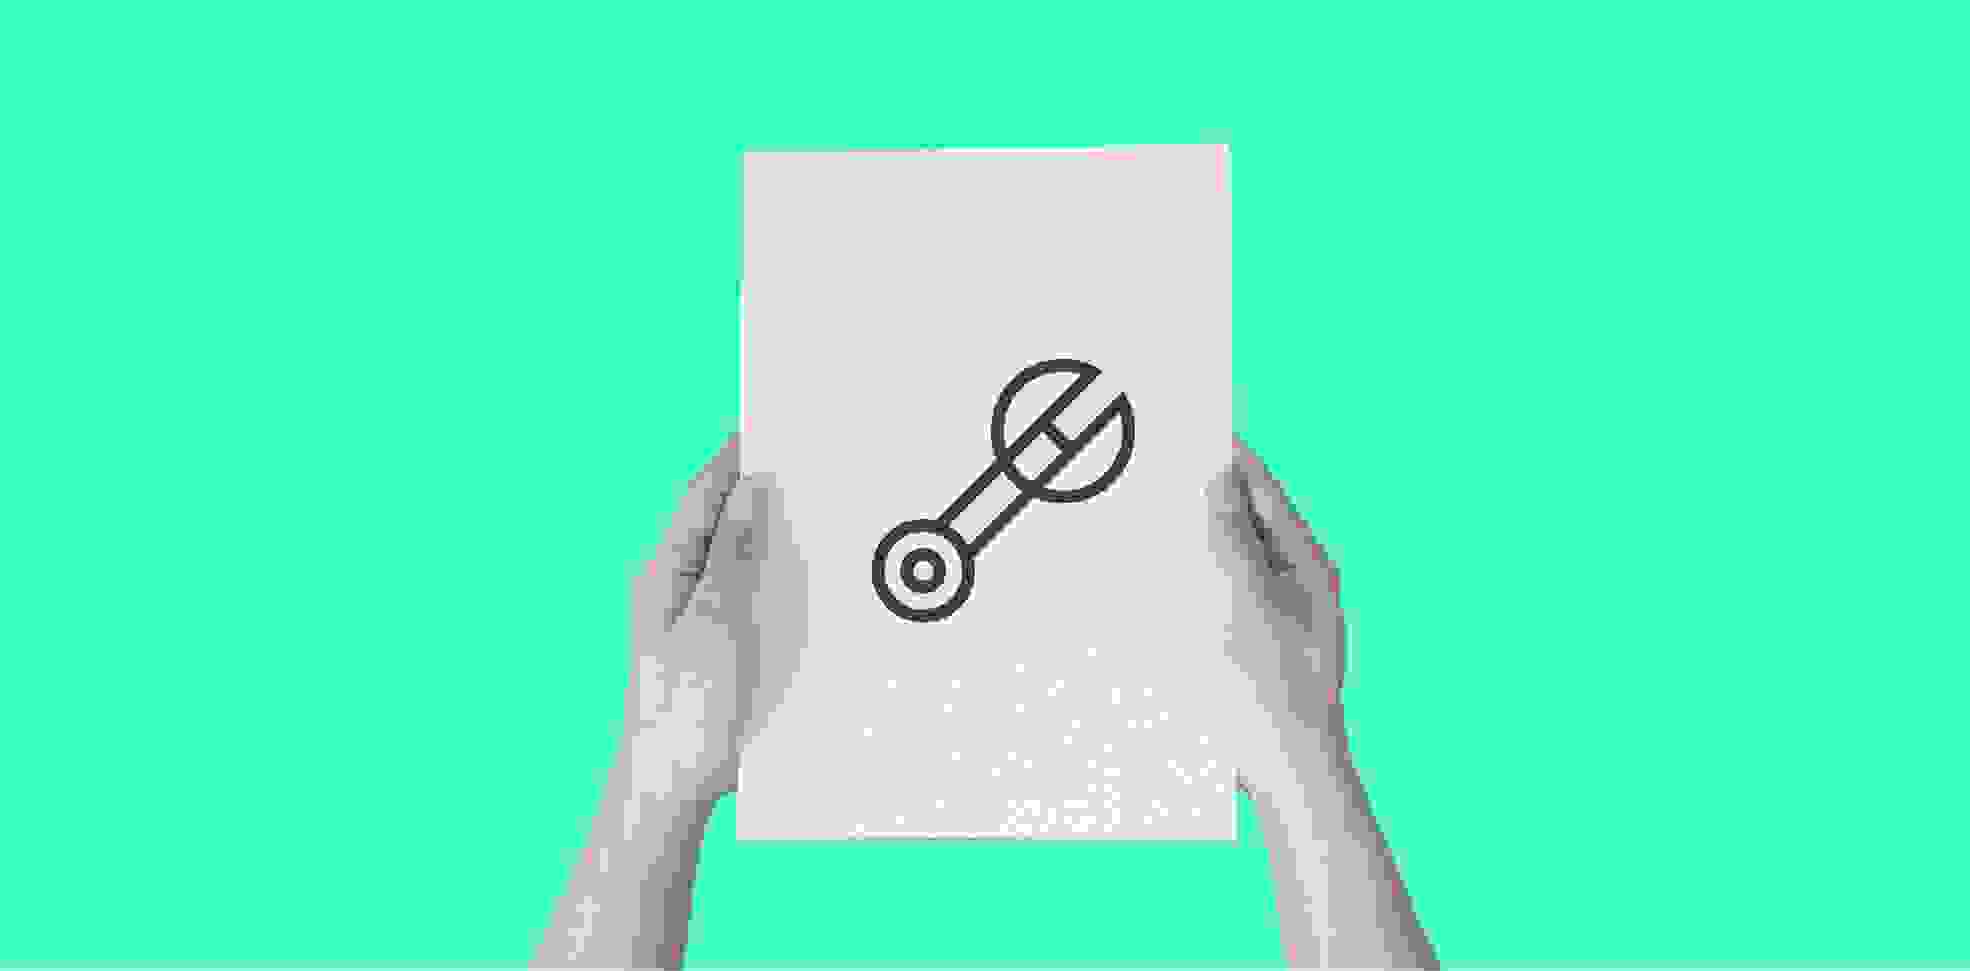 hands holding a sheet of paper with a wrench icon, on a green background